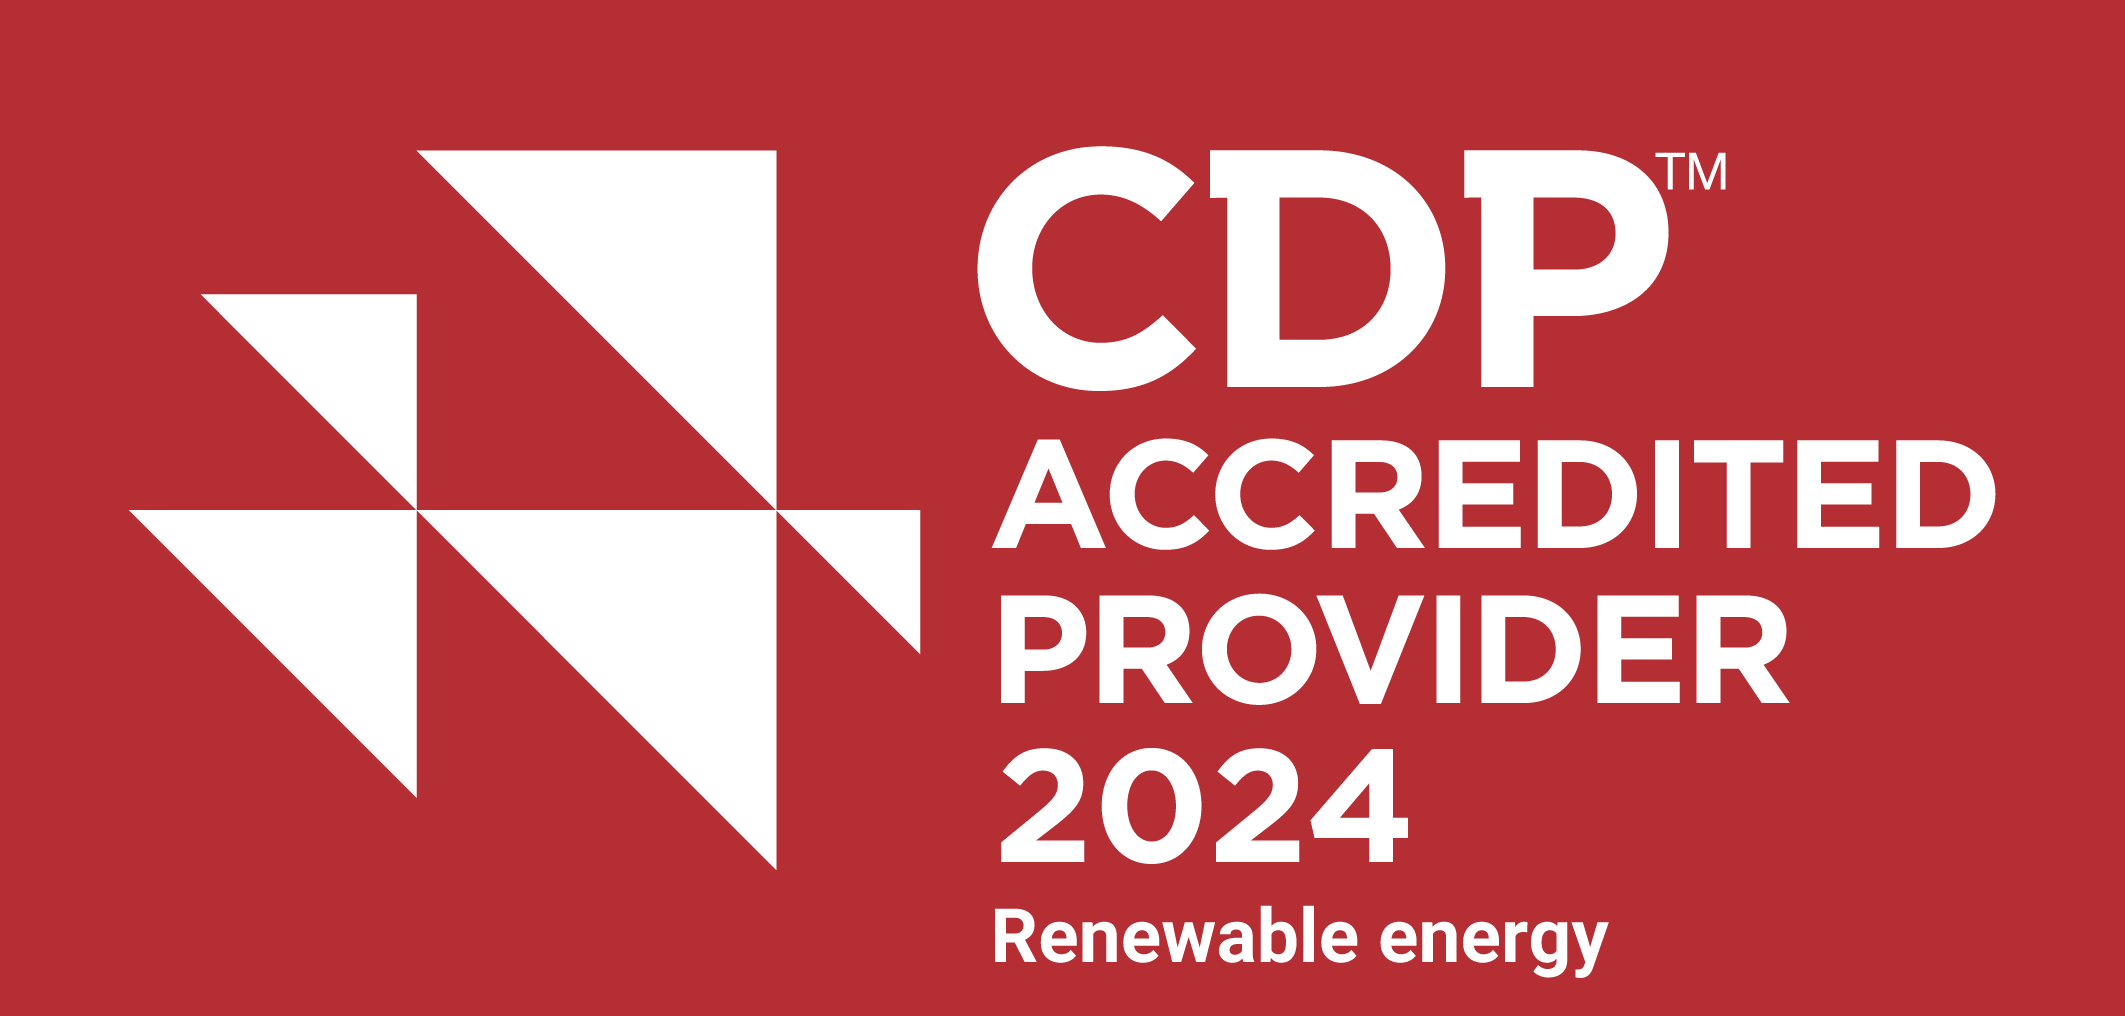 CDP ACCREDITED PROVIDER 2021